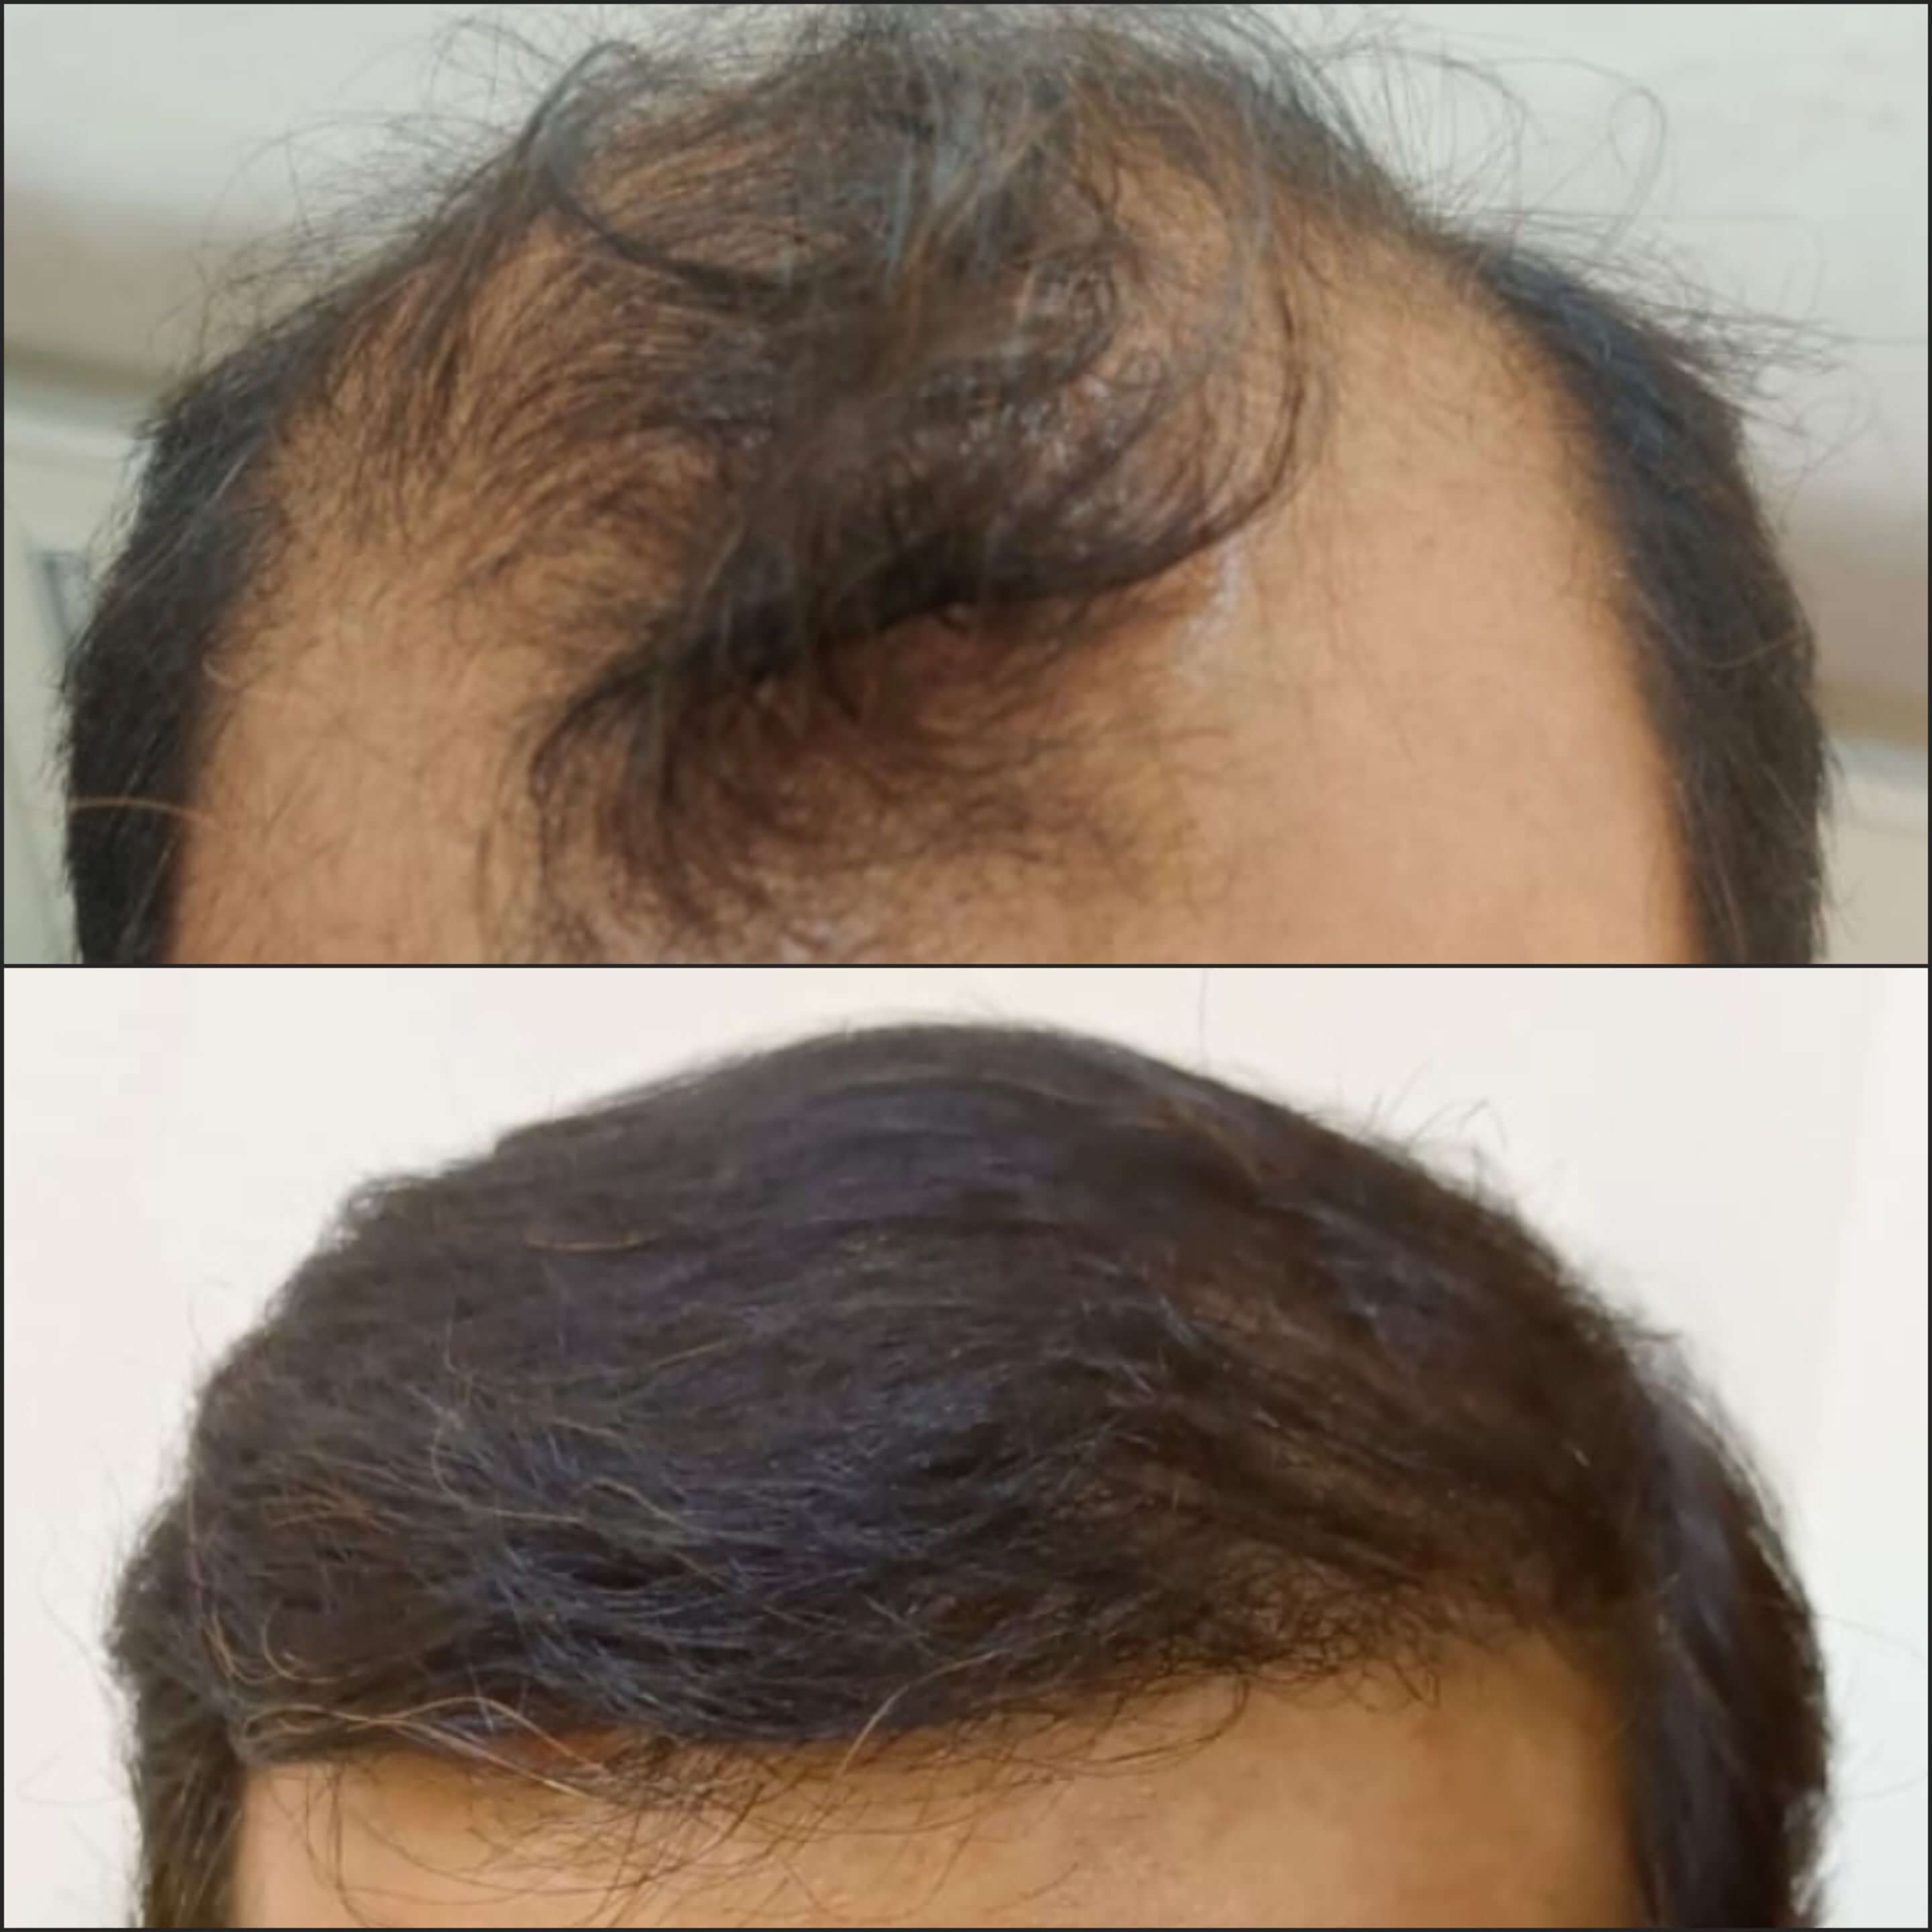 From Baldness to Beautiful Hair: How to Choose the Best Hair Transplant Surgeon